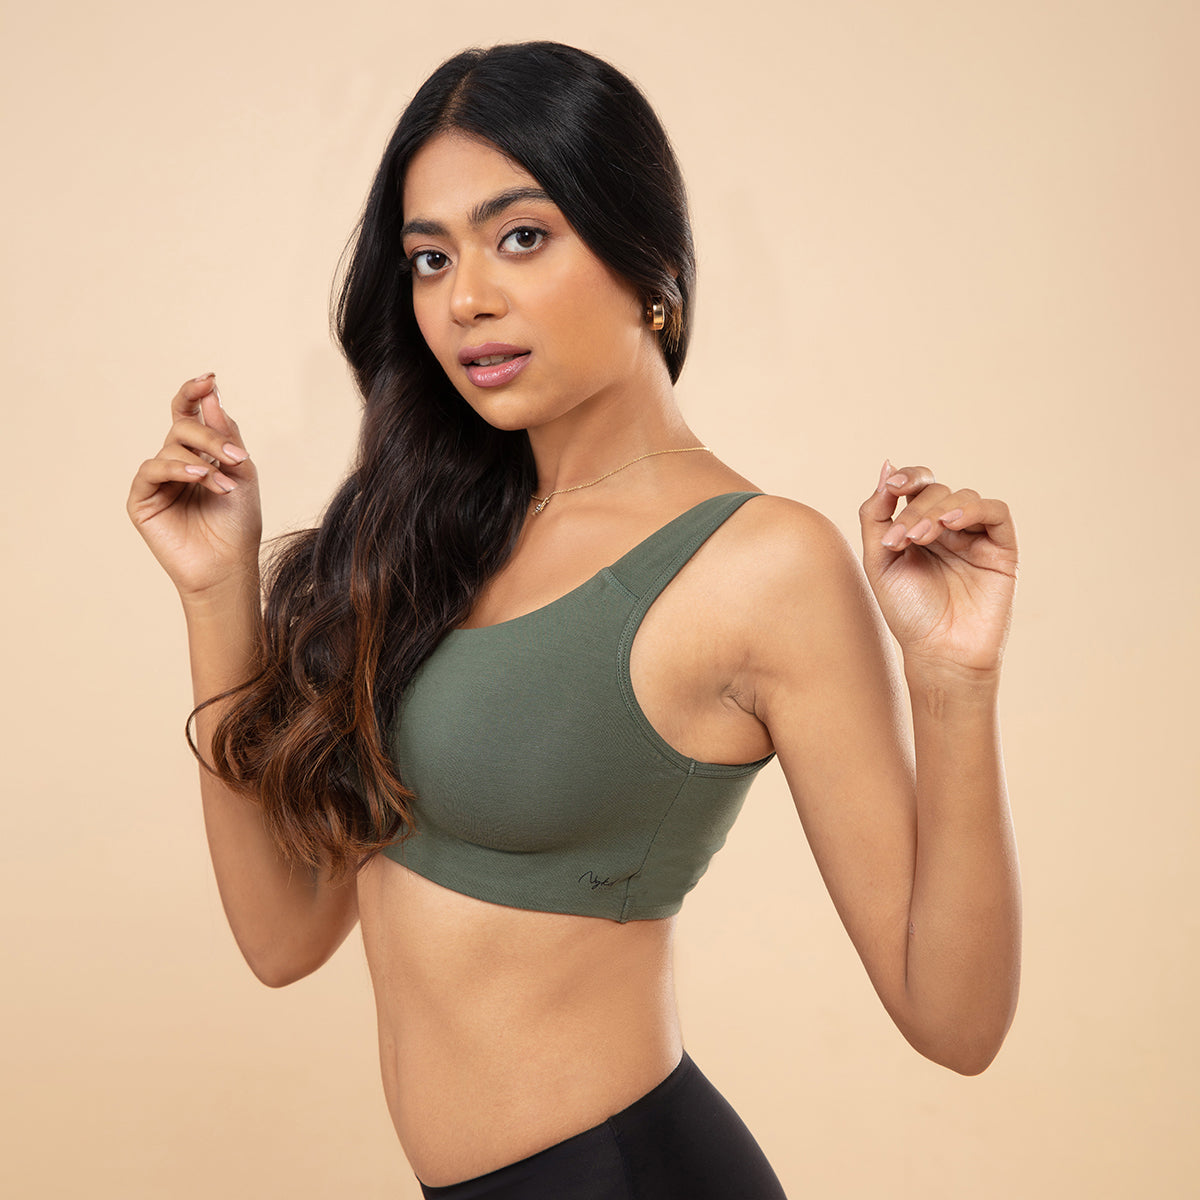 Soft cup easy-peasy slip-on bra with Full coverage - Bettle green NYB113